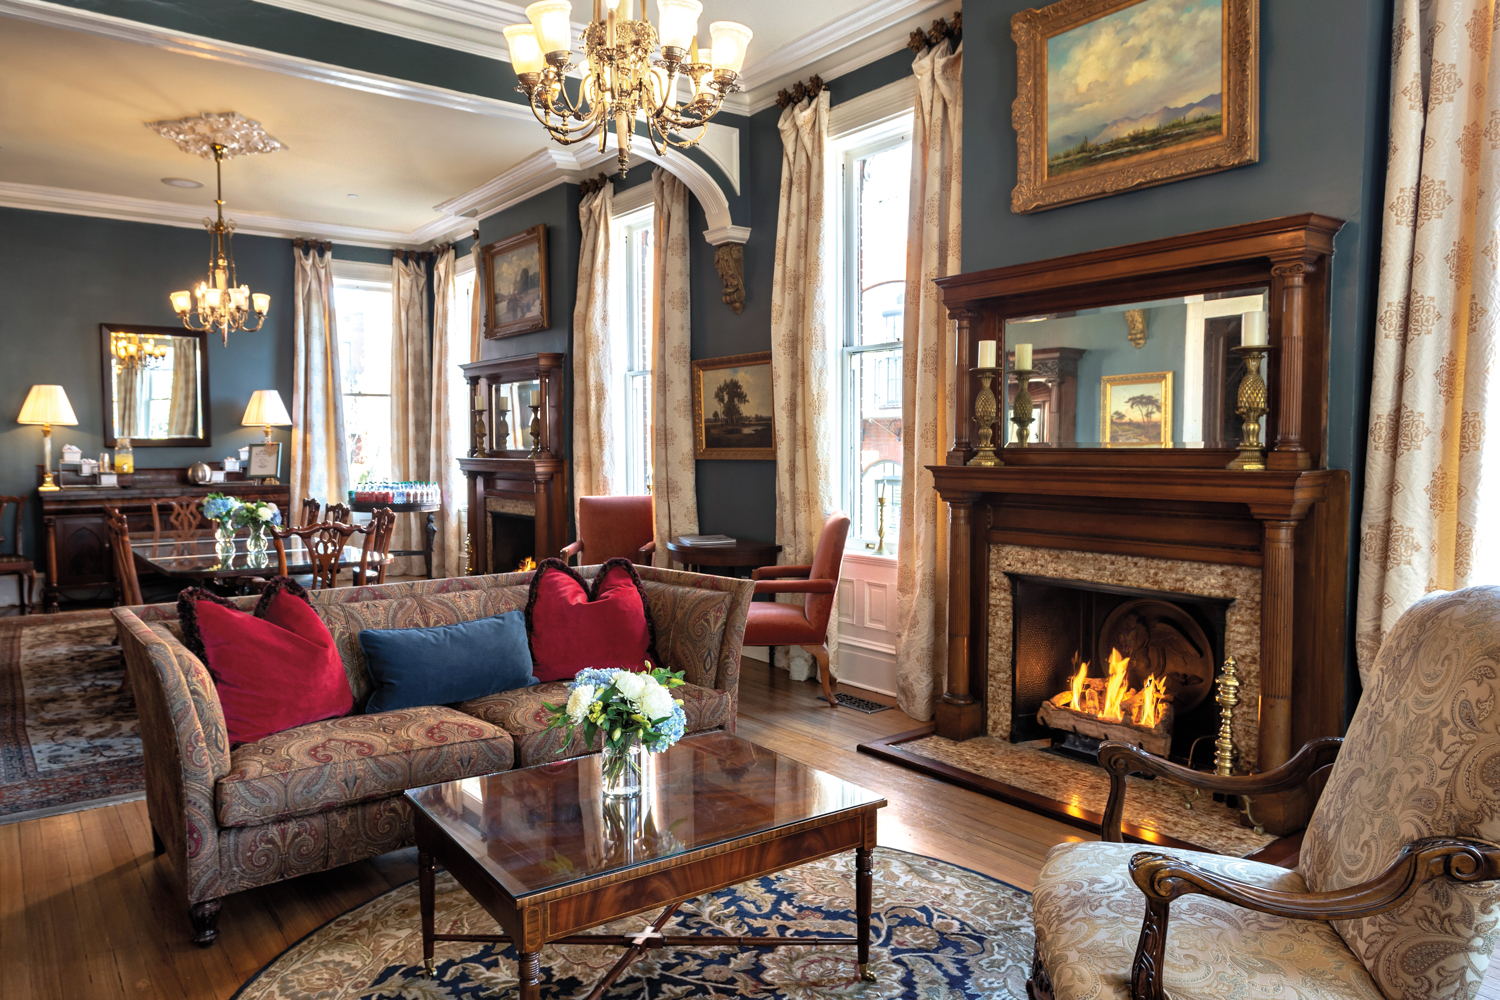 Historic great room with dining and seating areas, a fireplace and several large windows